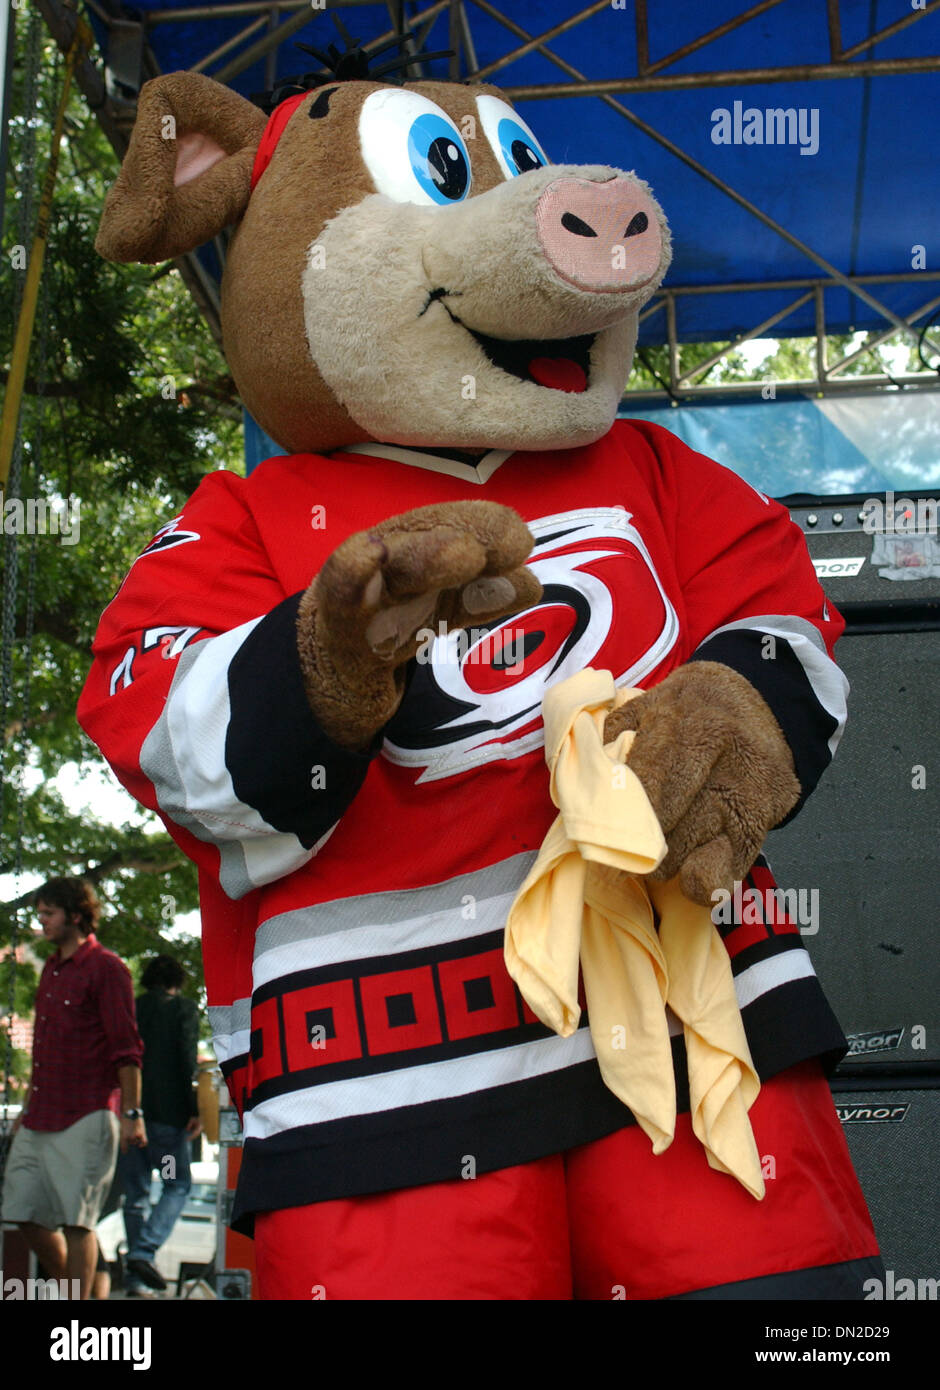 Carolina Hurricanes' mascot Stormy waves to the crowd during a parade to  celebrate the team's NHL Stanley Cup Championship at the RBC Center in  Raleigh, NC June 20, 2006. Carolina defeated the